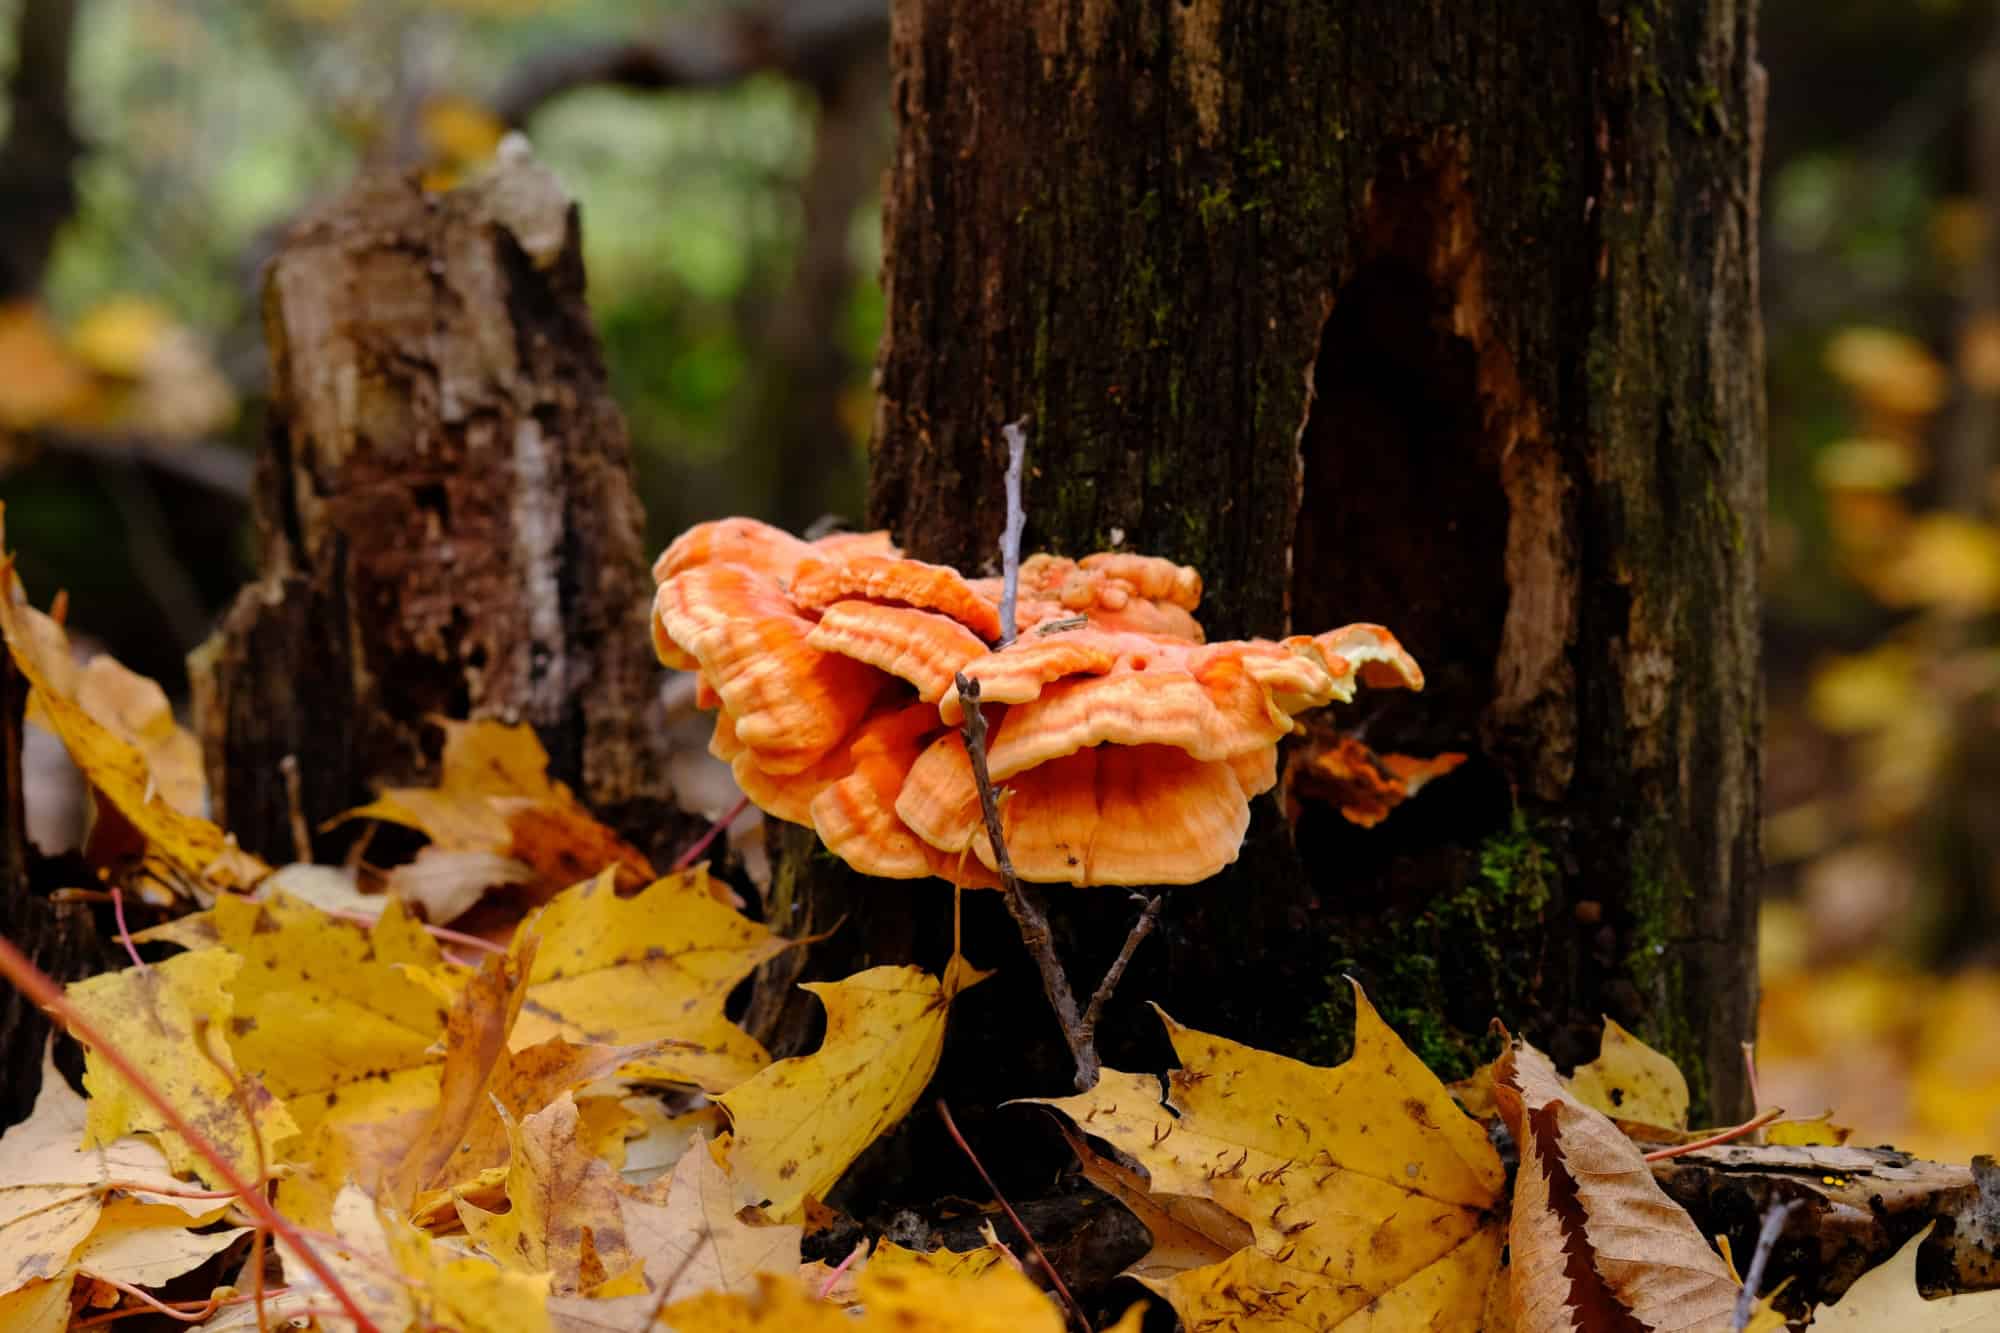 chicken of the woods mushroom in fall forest